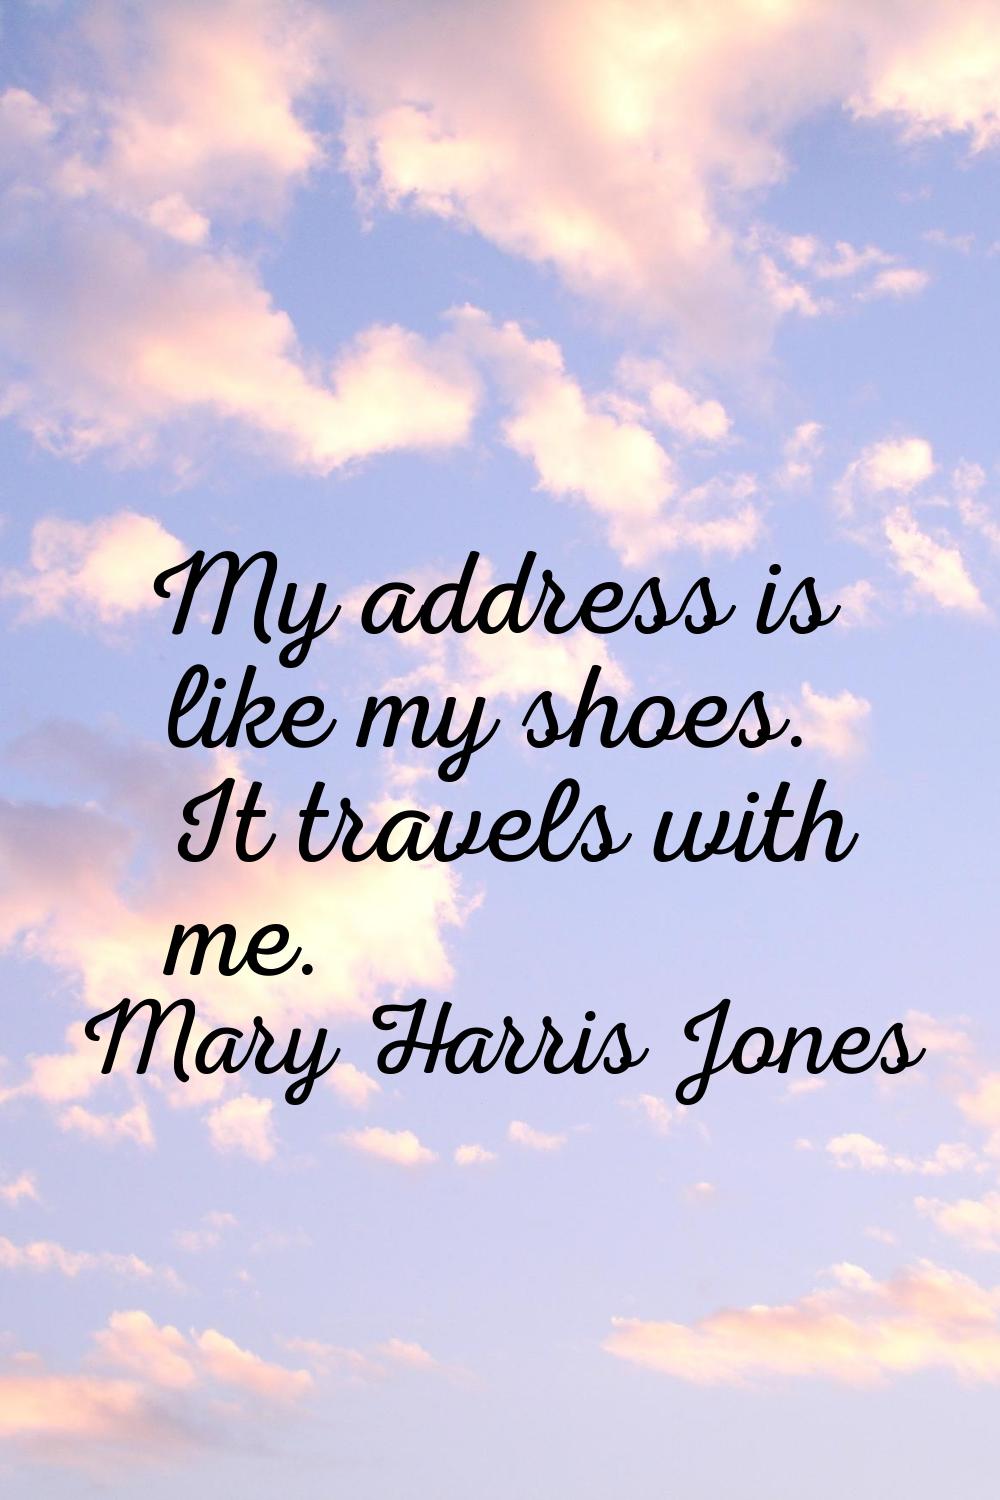 My address is like my shoes. It travels with me.